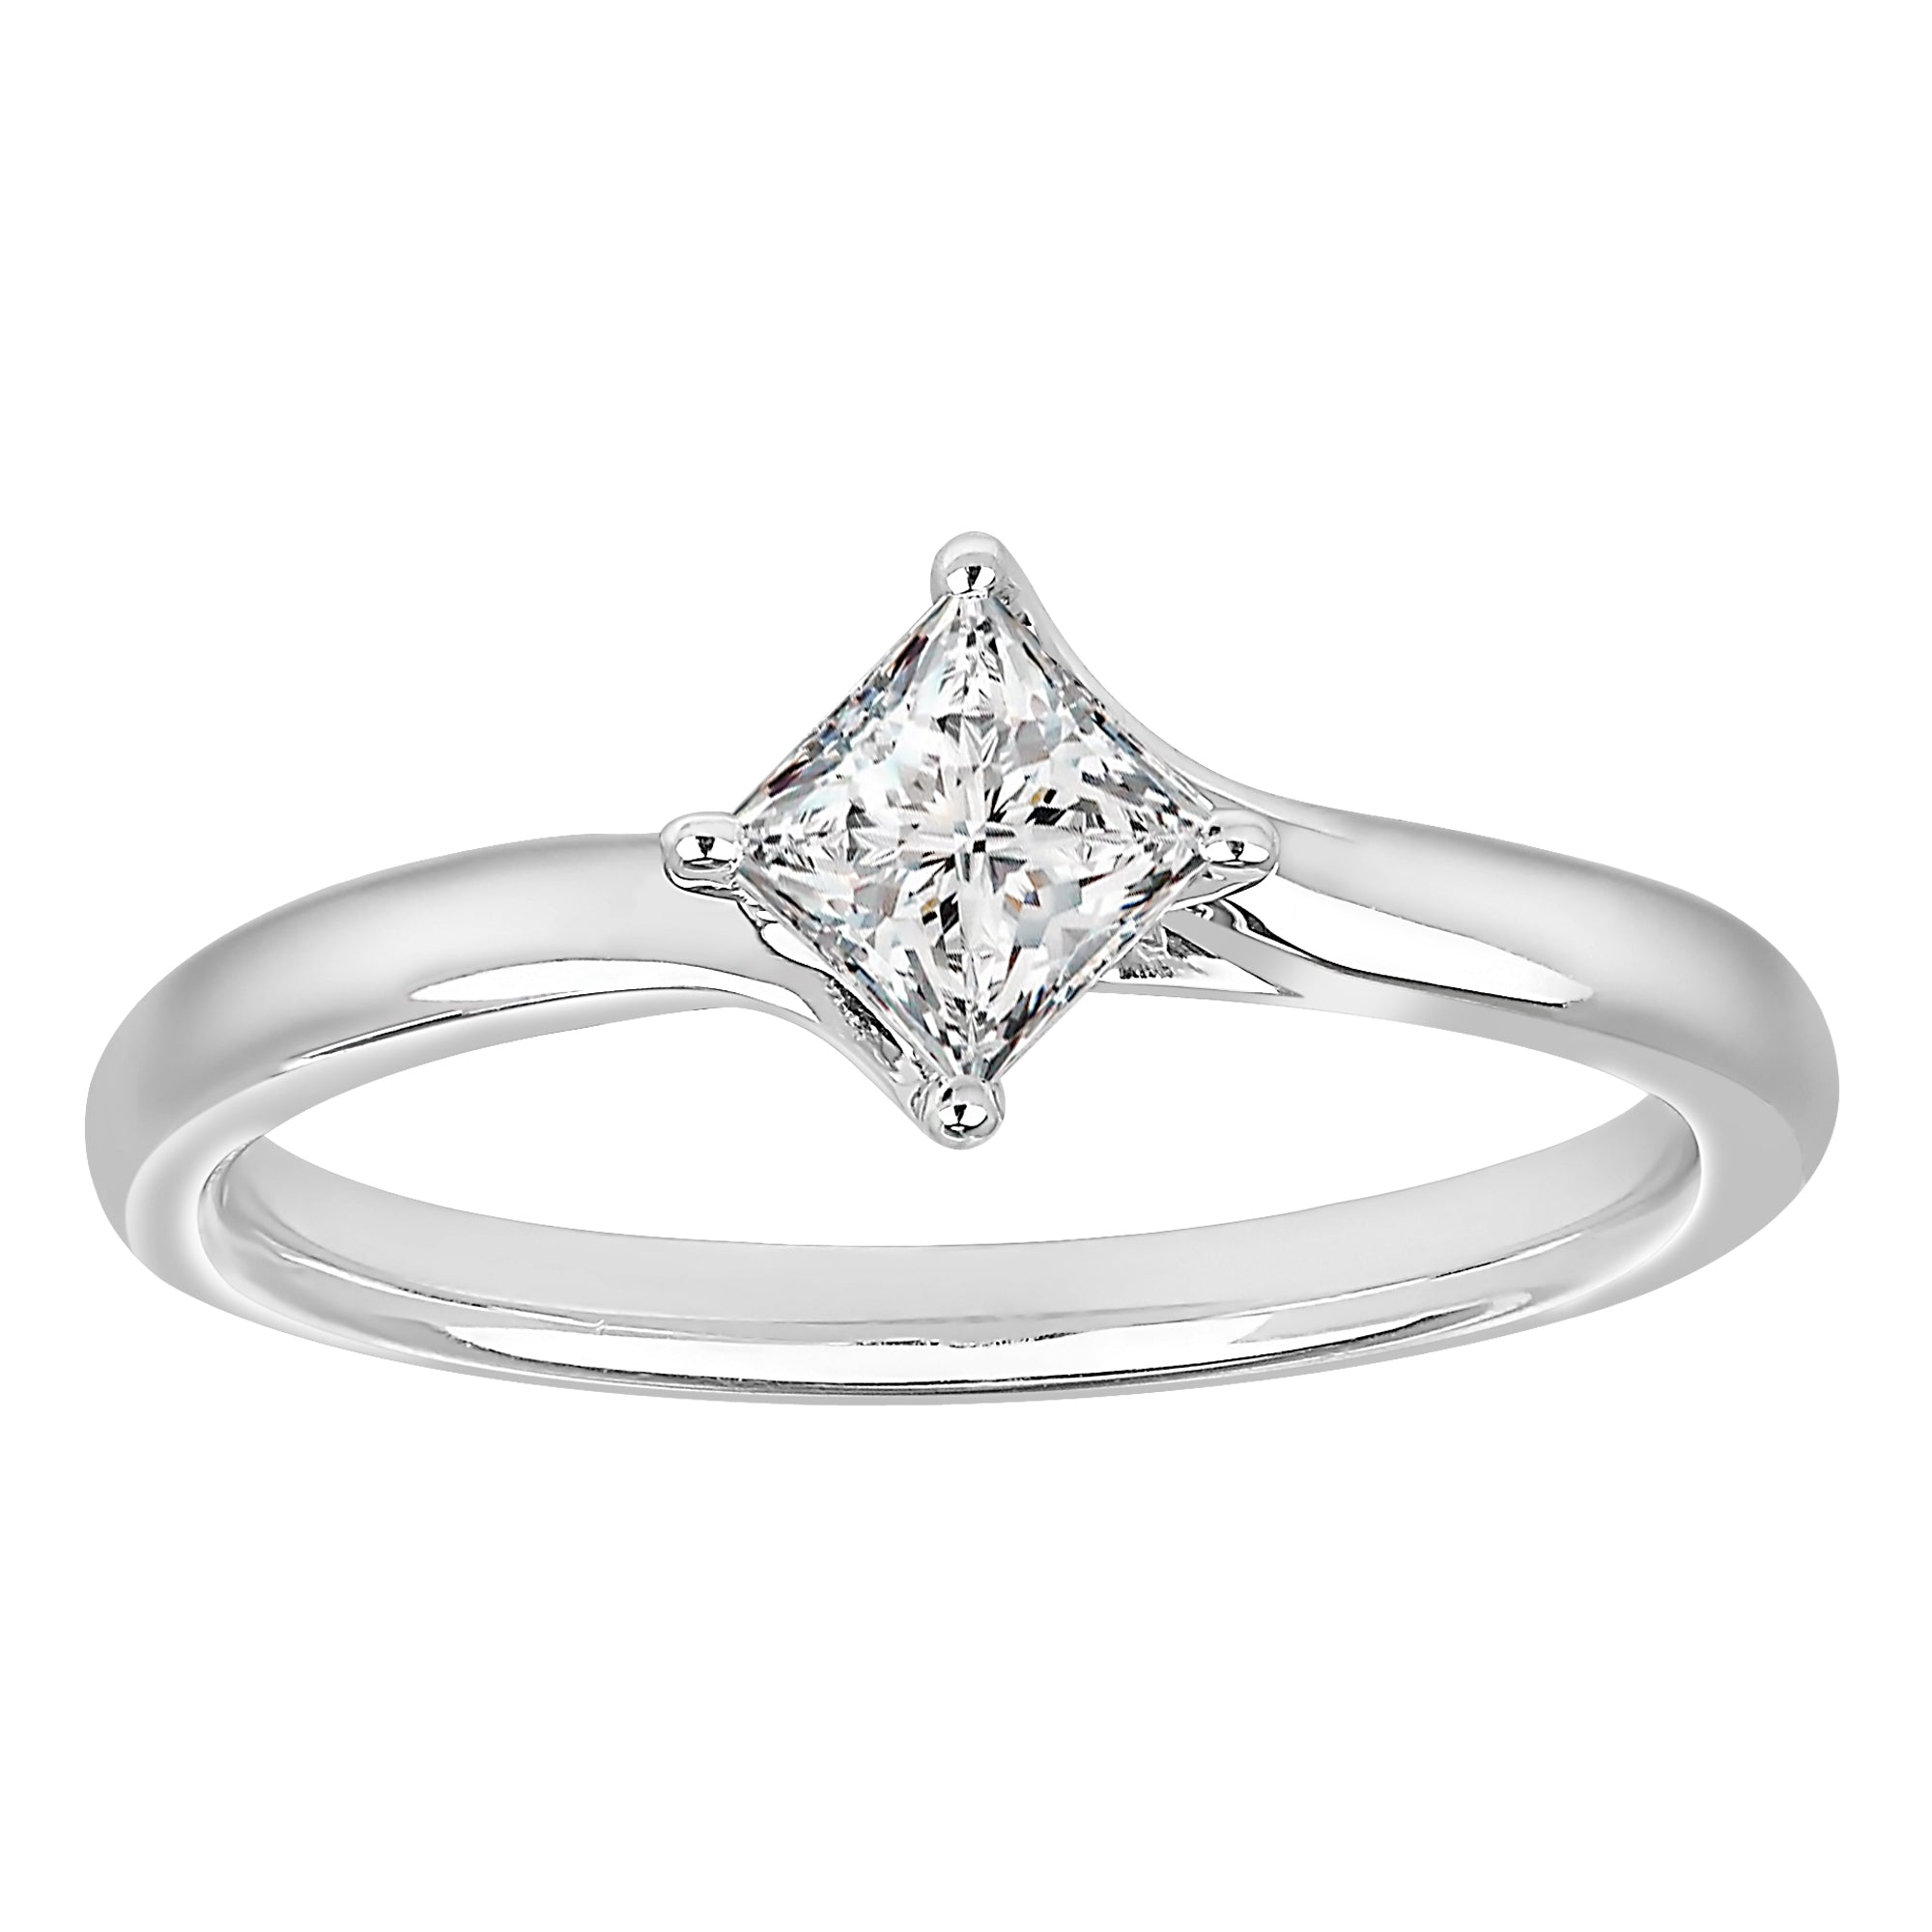 Sterling Silver Cubic Zirconia Ring - AK1023 - Hallmark Jewellers Formby & The Jewellers Bench Widnes